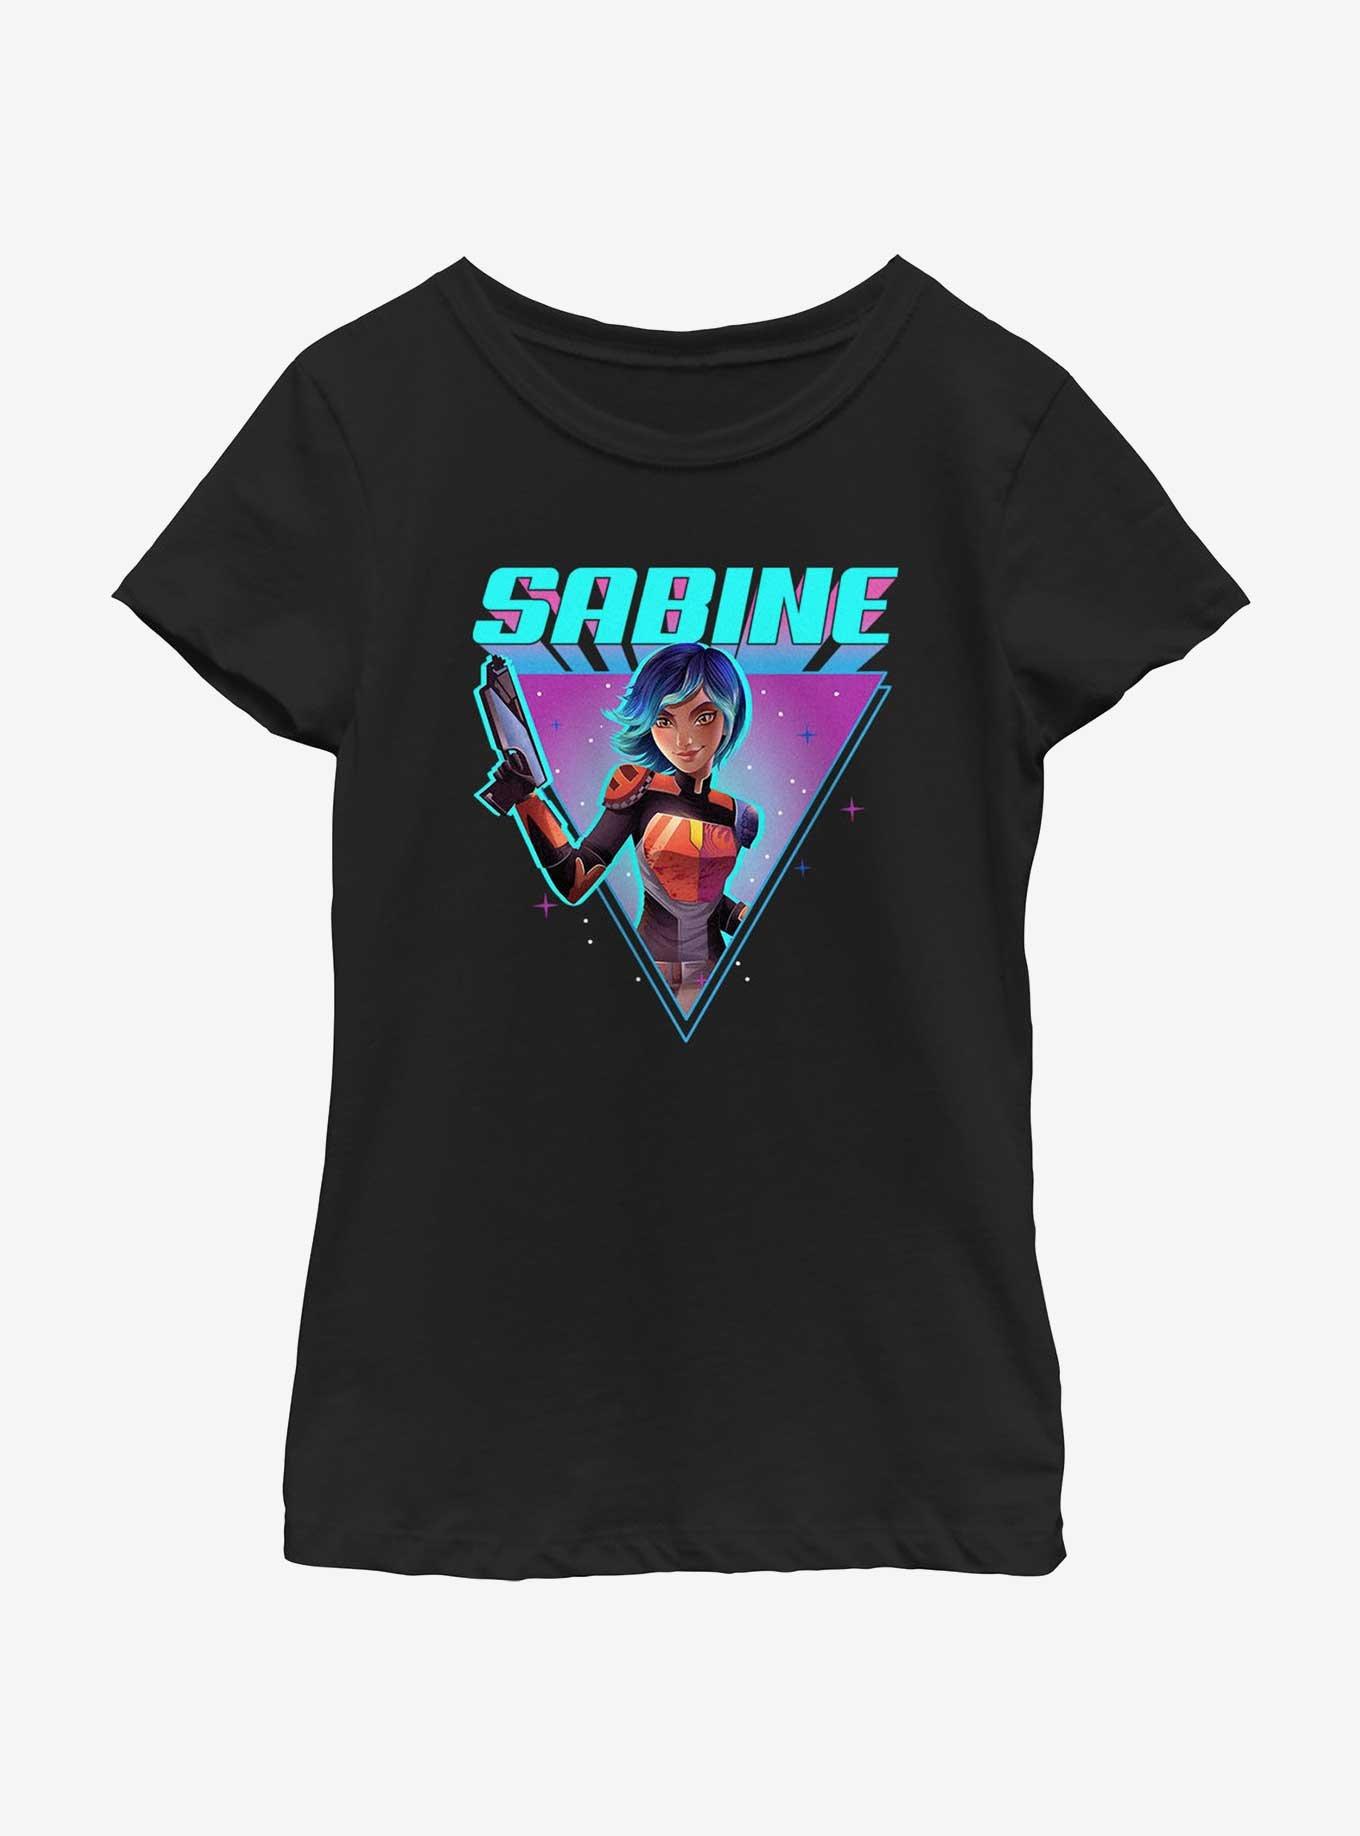 Star Wars: Forces of Destiny Sabine Hero Triangle Girls Youth T-Shirt, BLACK, hi-res